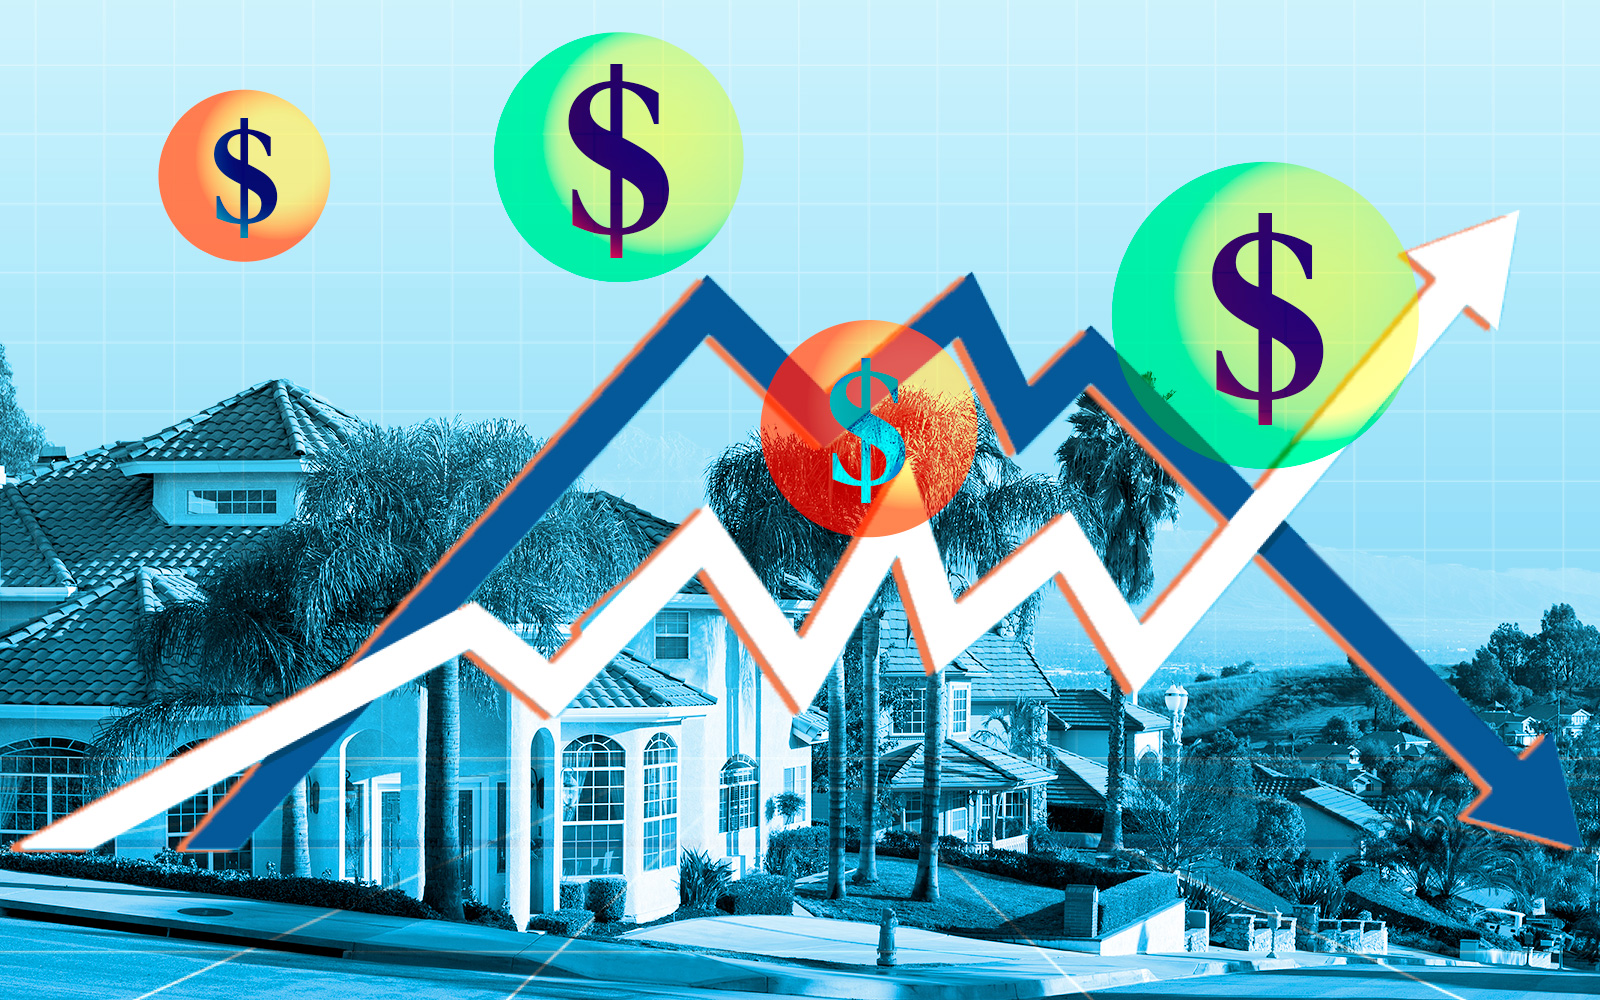 As SoCal home listings plunge, prices perk up